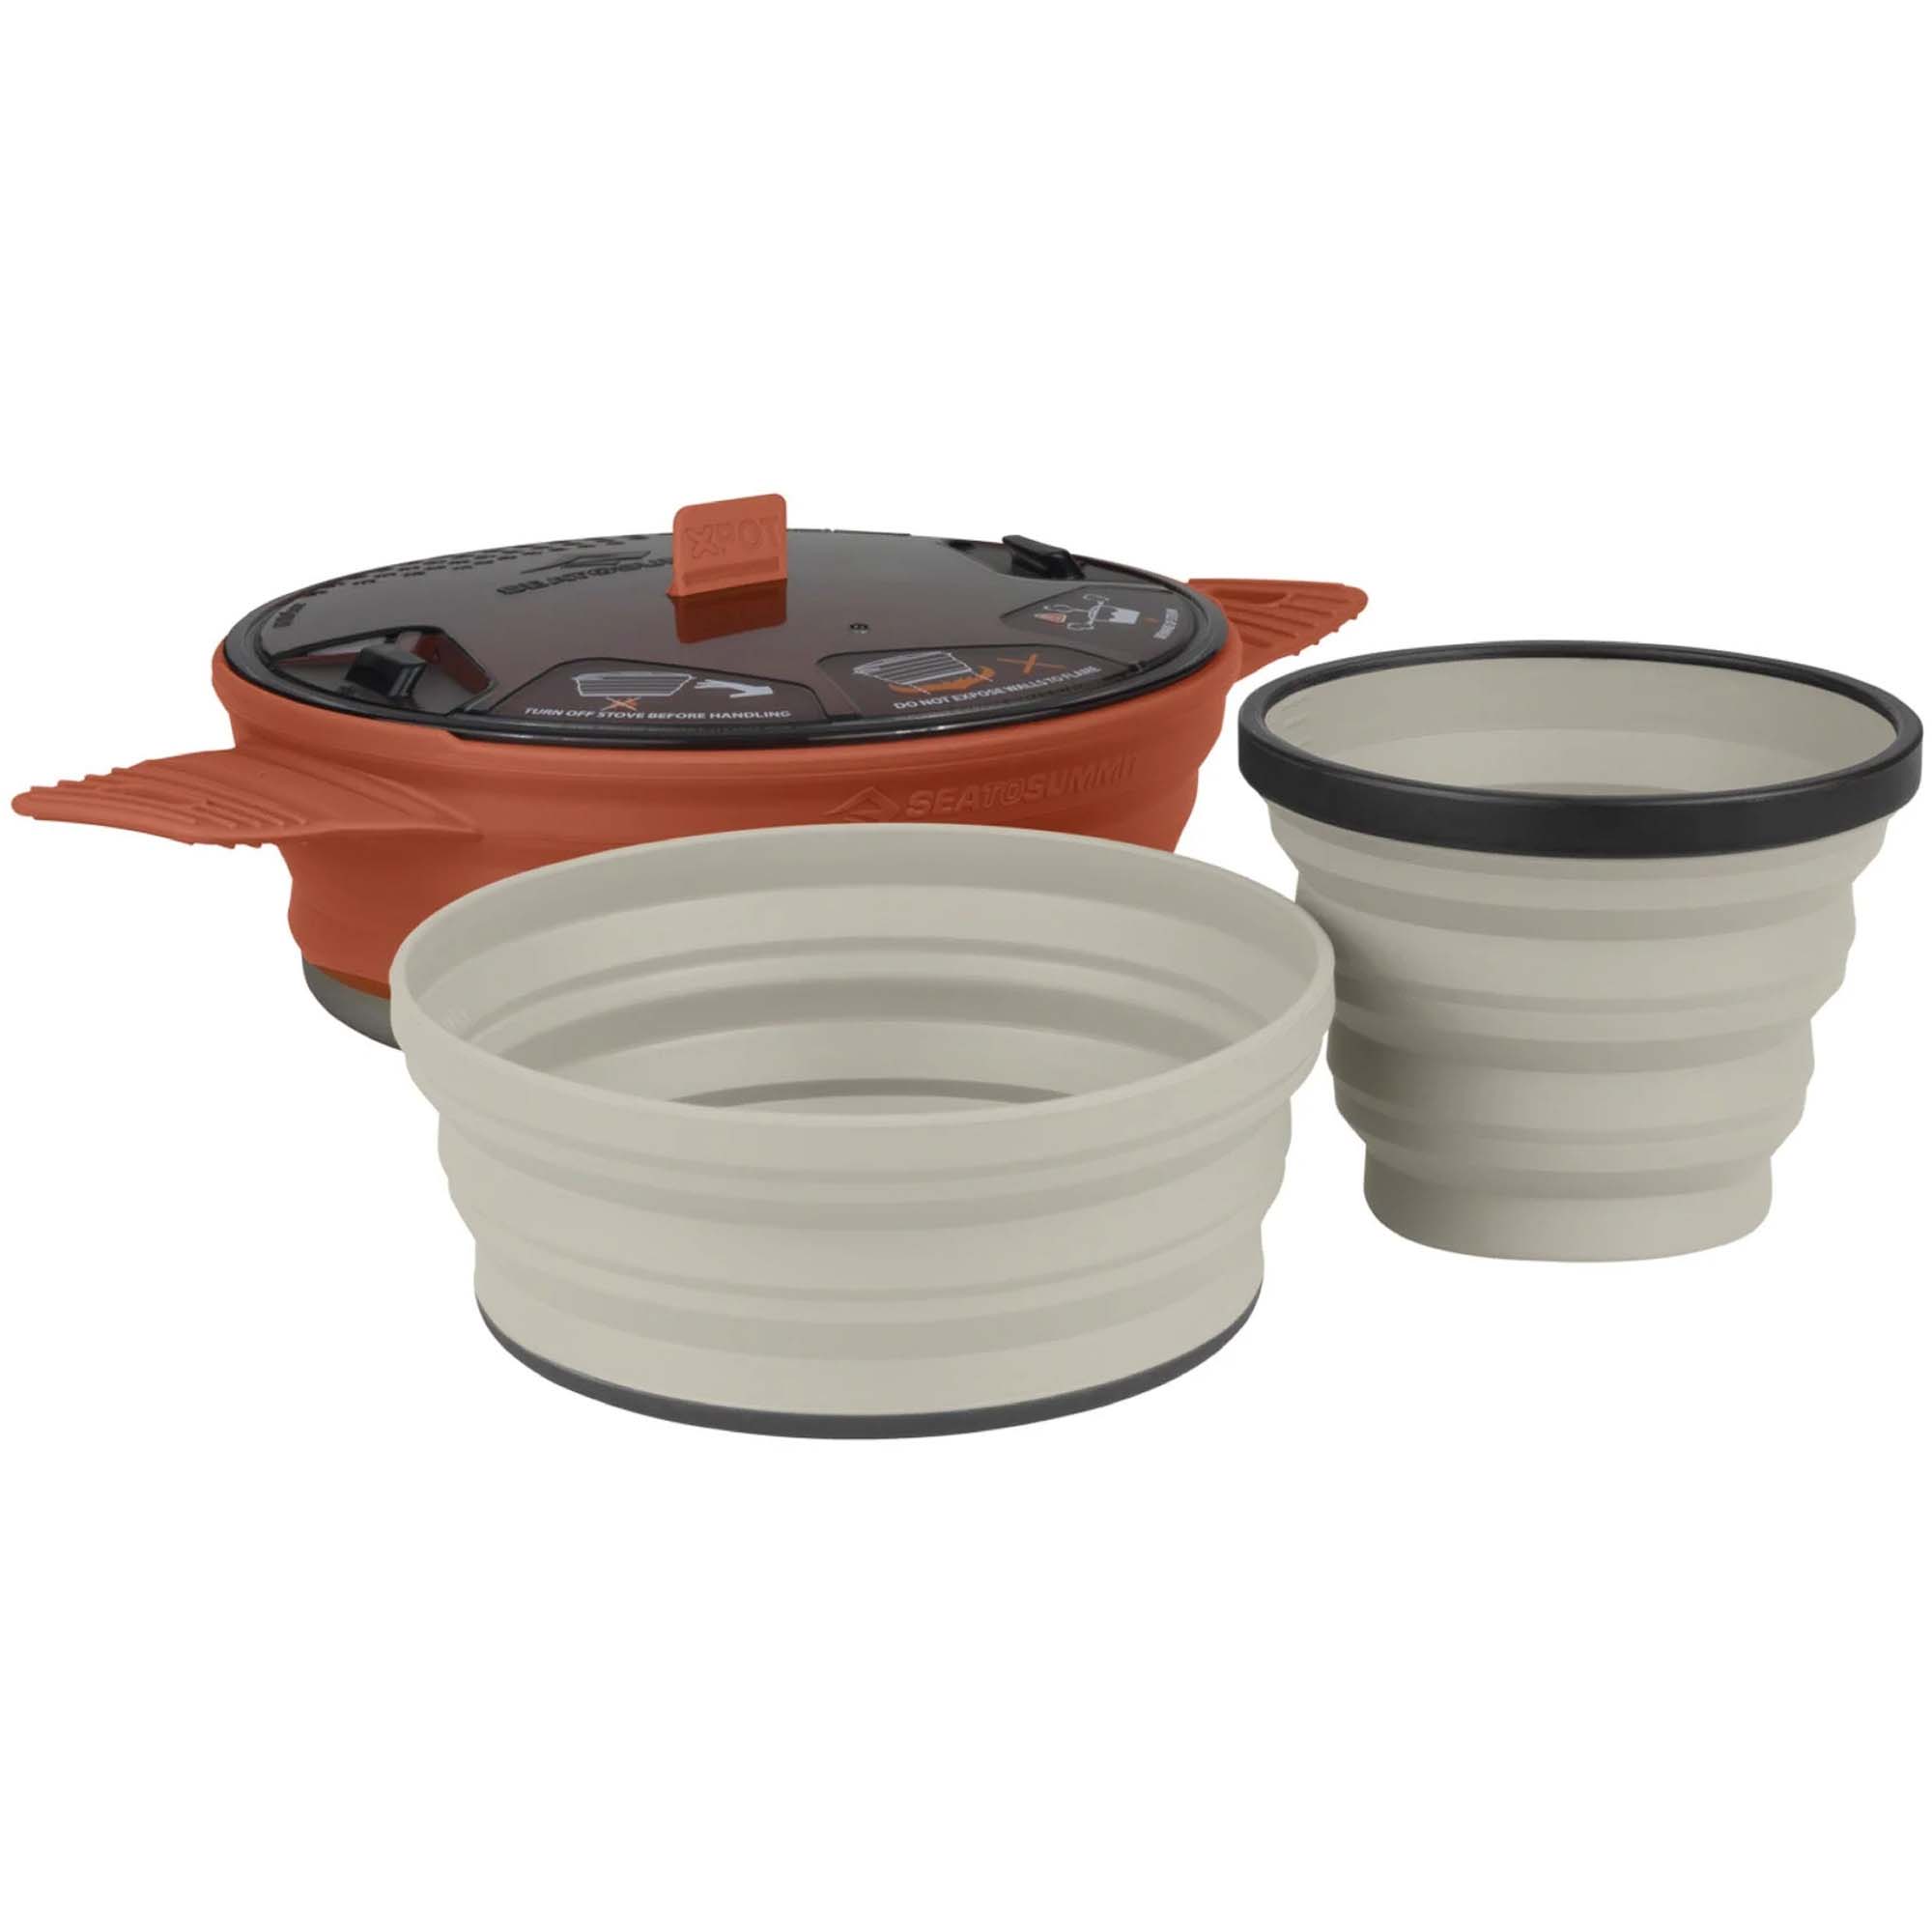 Sea to Summit X-Set 21 Camping & Backpacking Cookset